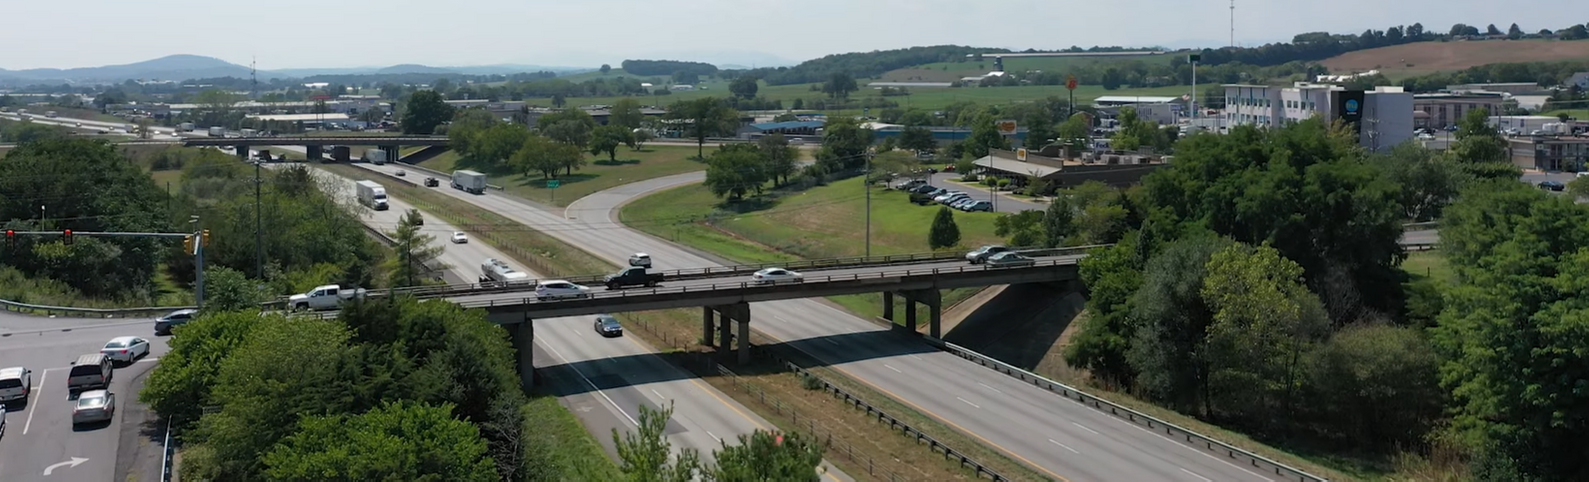 Overhead view of I-81 near exit 243 at Harrisonburg